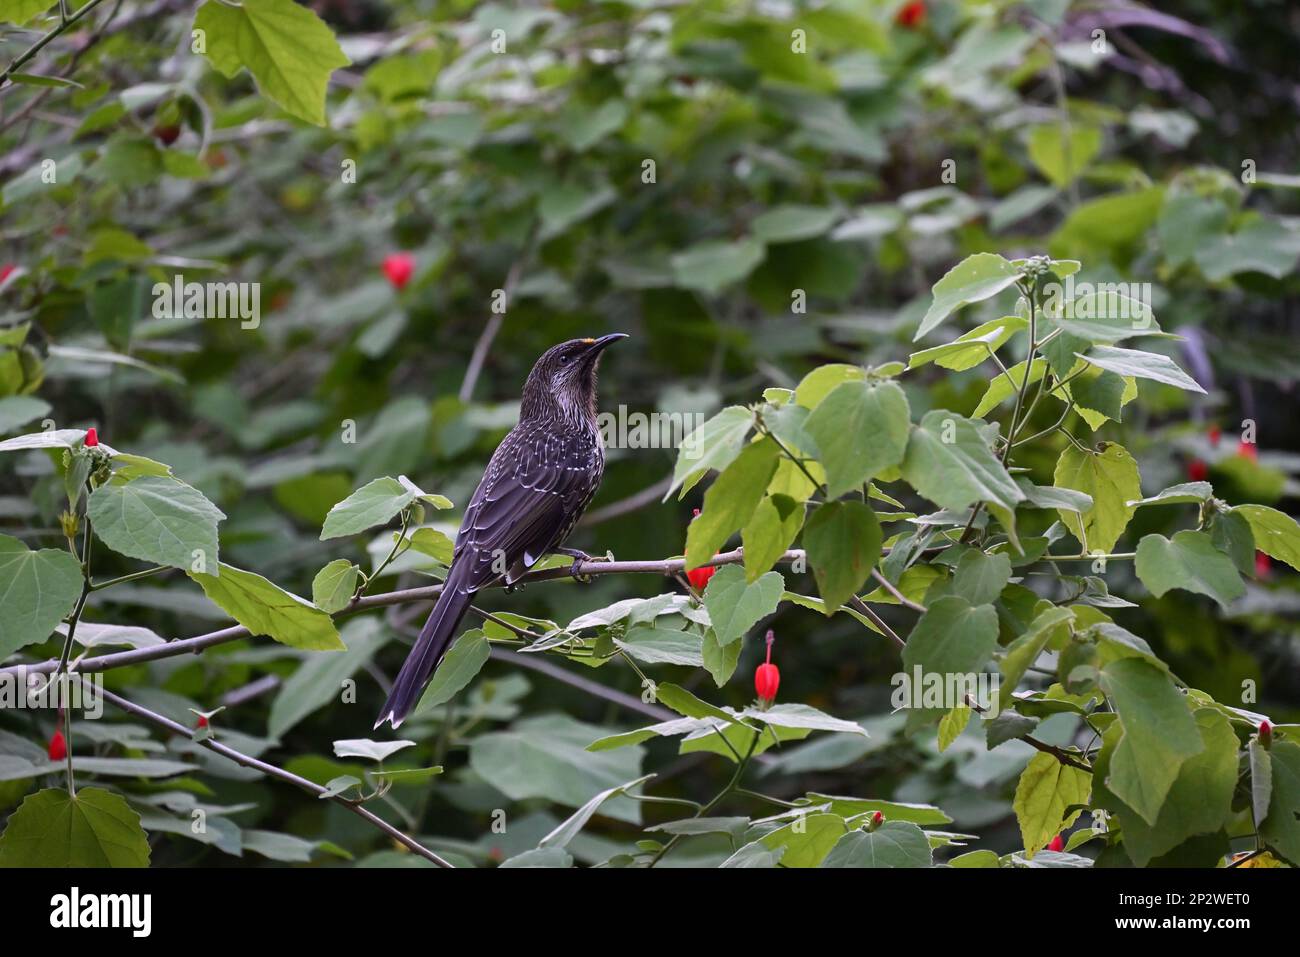 Side view of a little wattlebird perched on a thin branch, with the bird surrounded by green plant life and red flowers Stock Photo